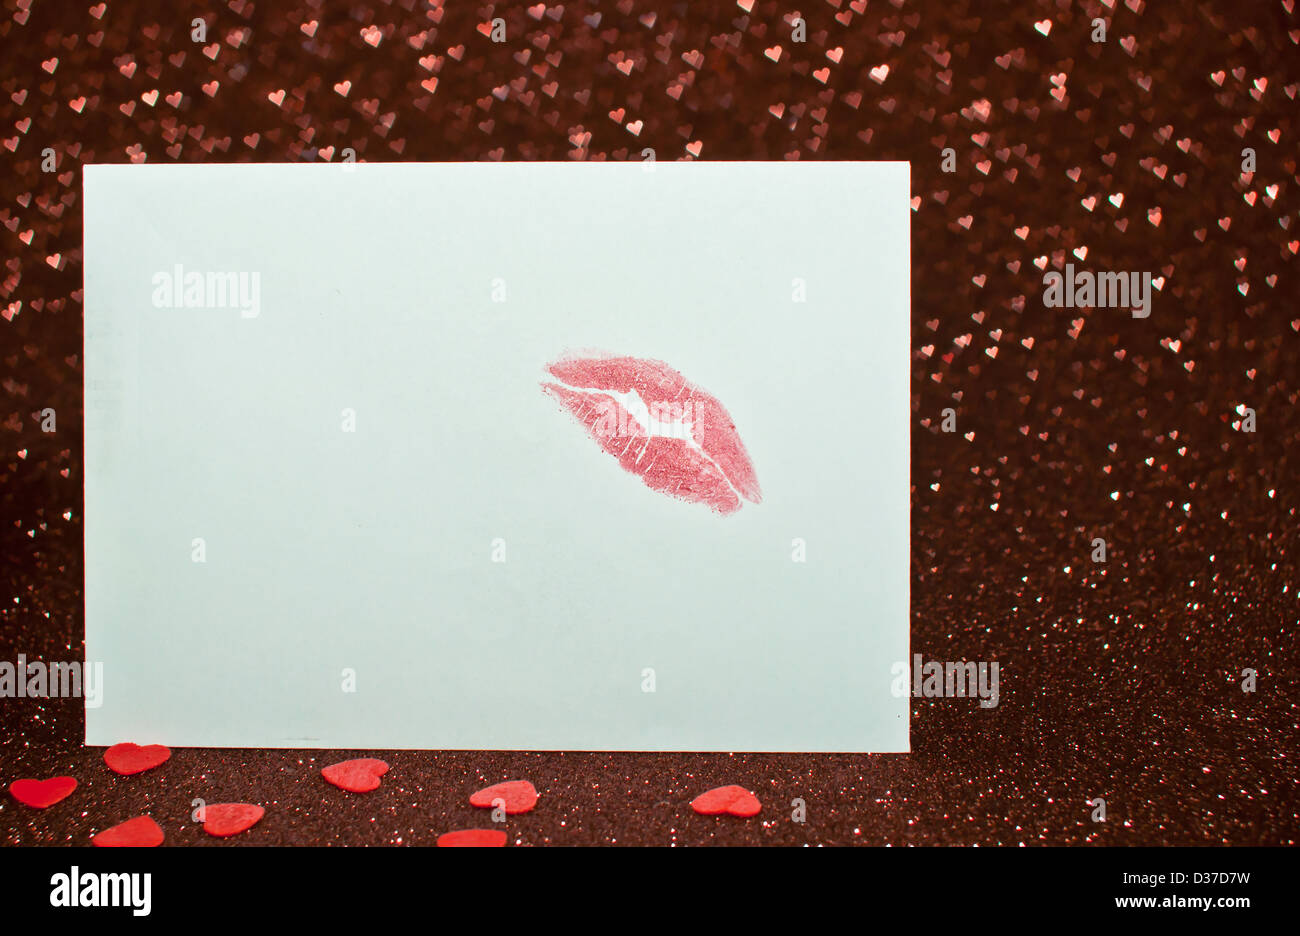 Invitation, Shape, Red, Horizontal, Expressing Positivity, Human Lips, Human Mouth, Gift, Sign, Cosmetics, February, Concepts Stock Photo